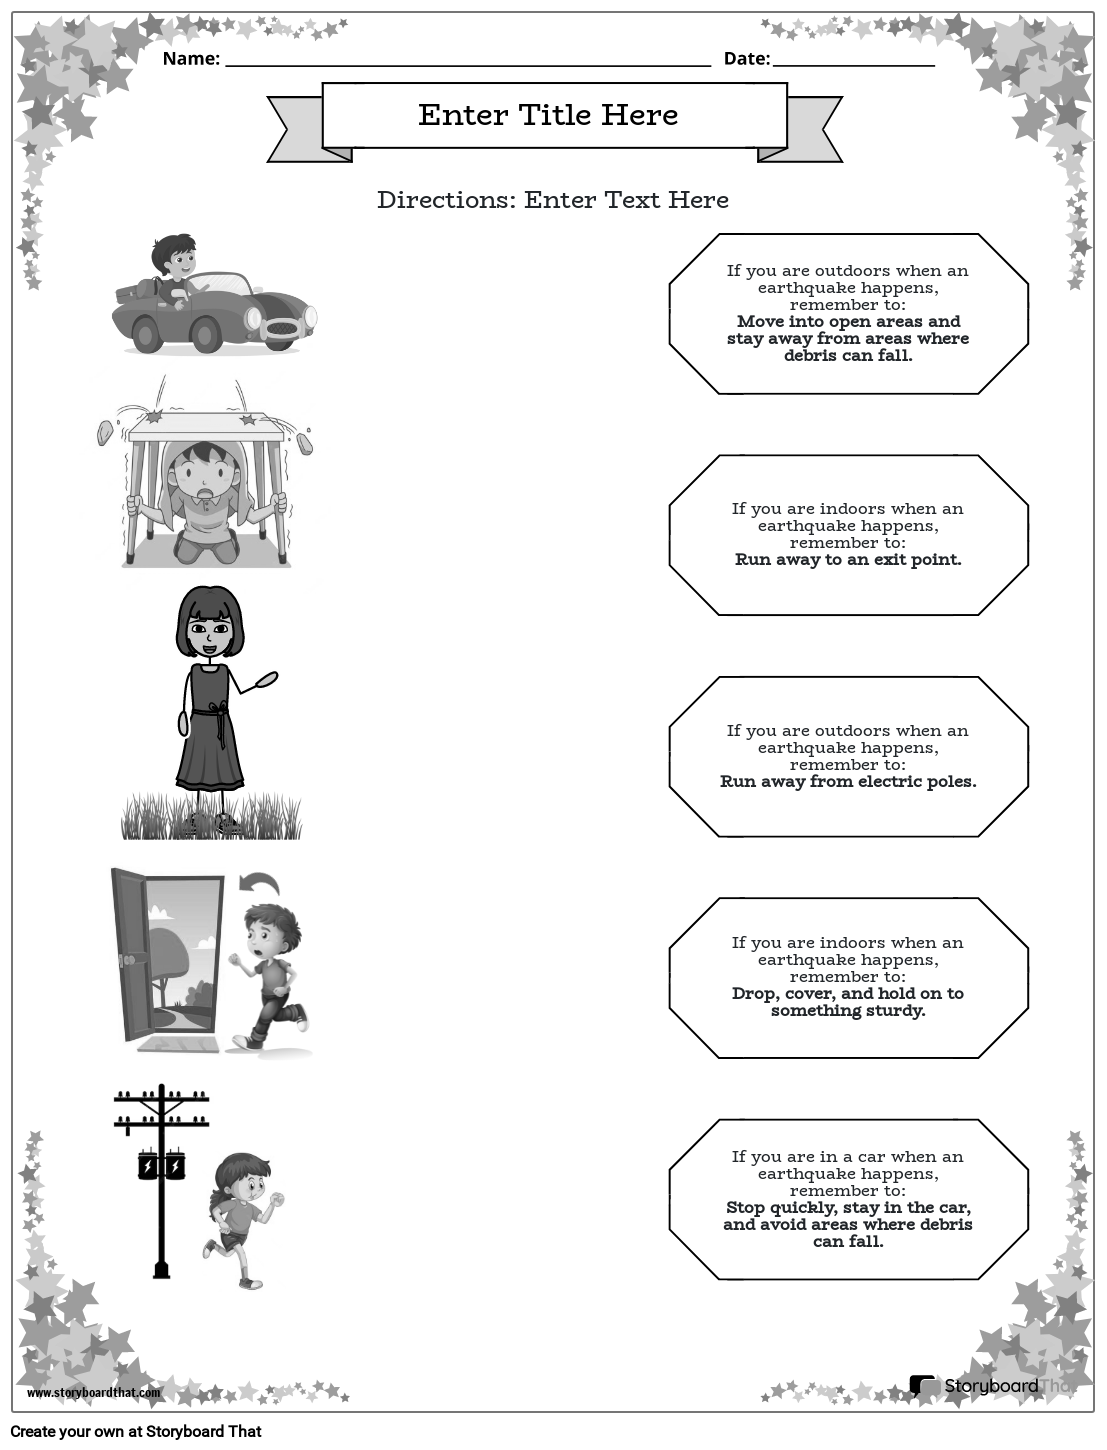 indoor and outdoor precautions earthquake worksheet with star border BW